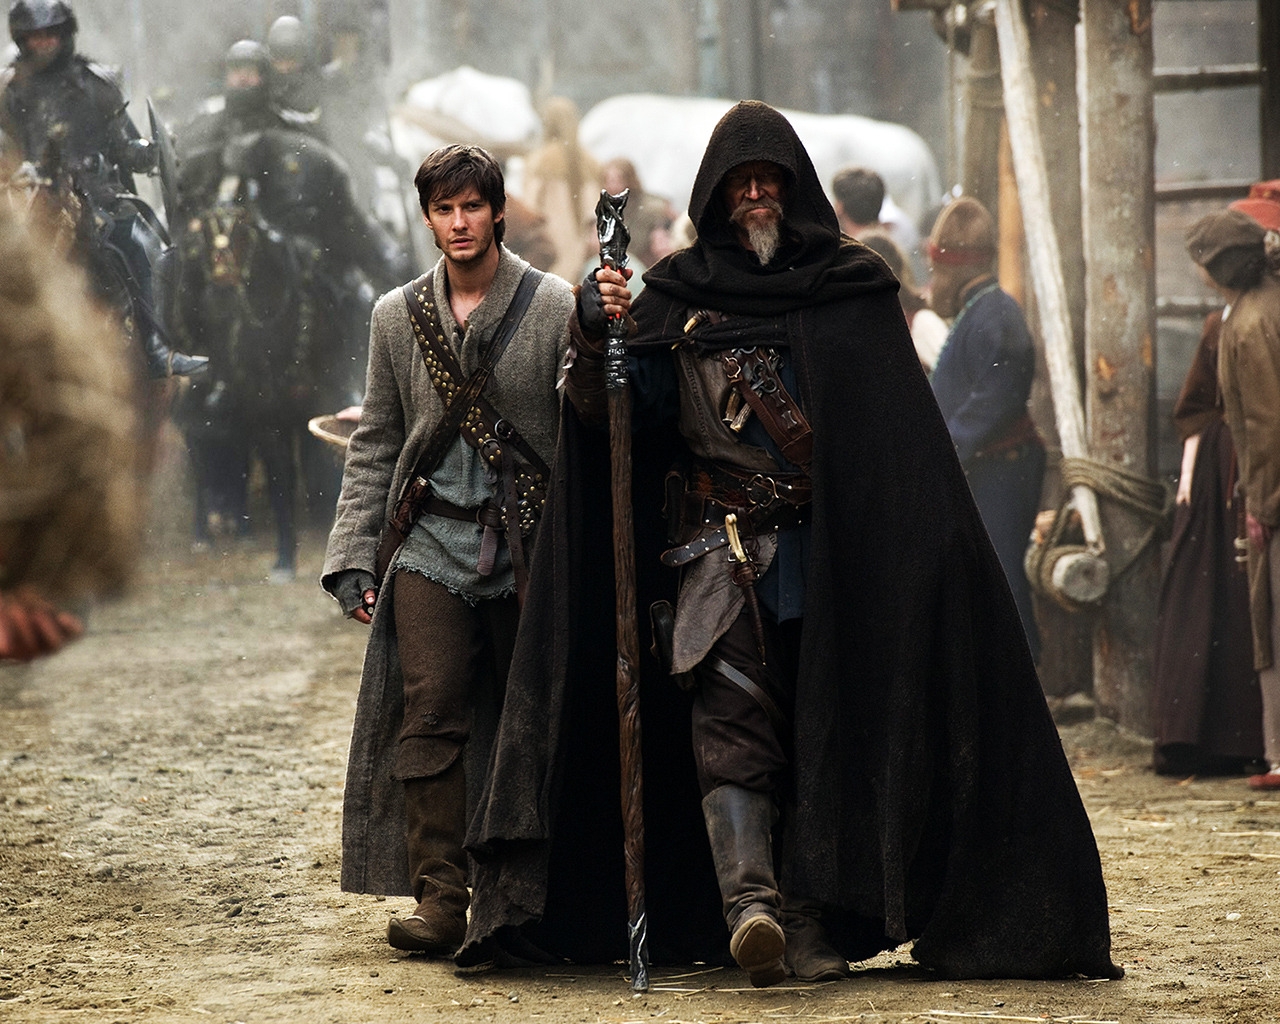 The Seventh Son Movie 2013 for 1280 x 1024 resolution